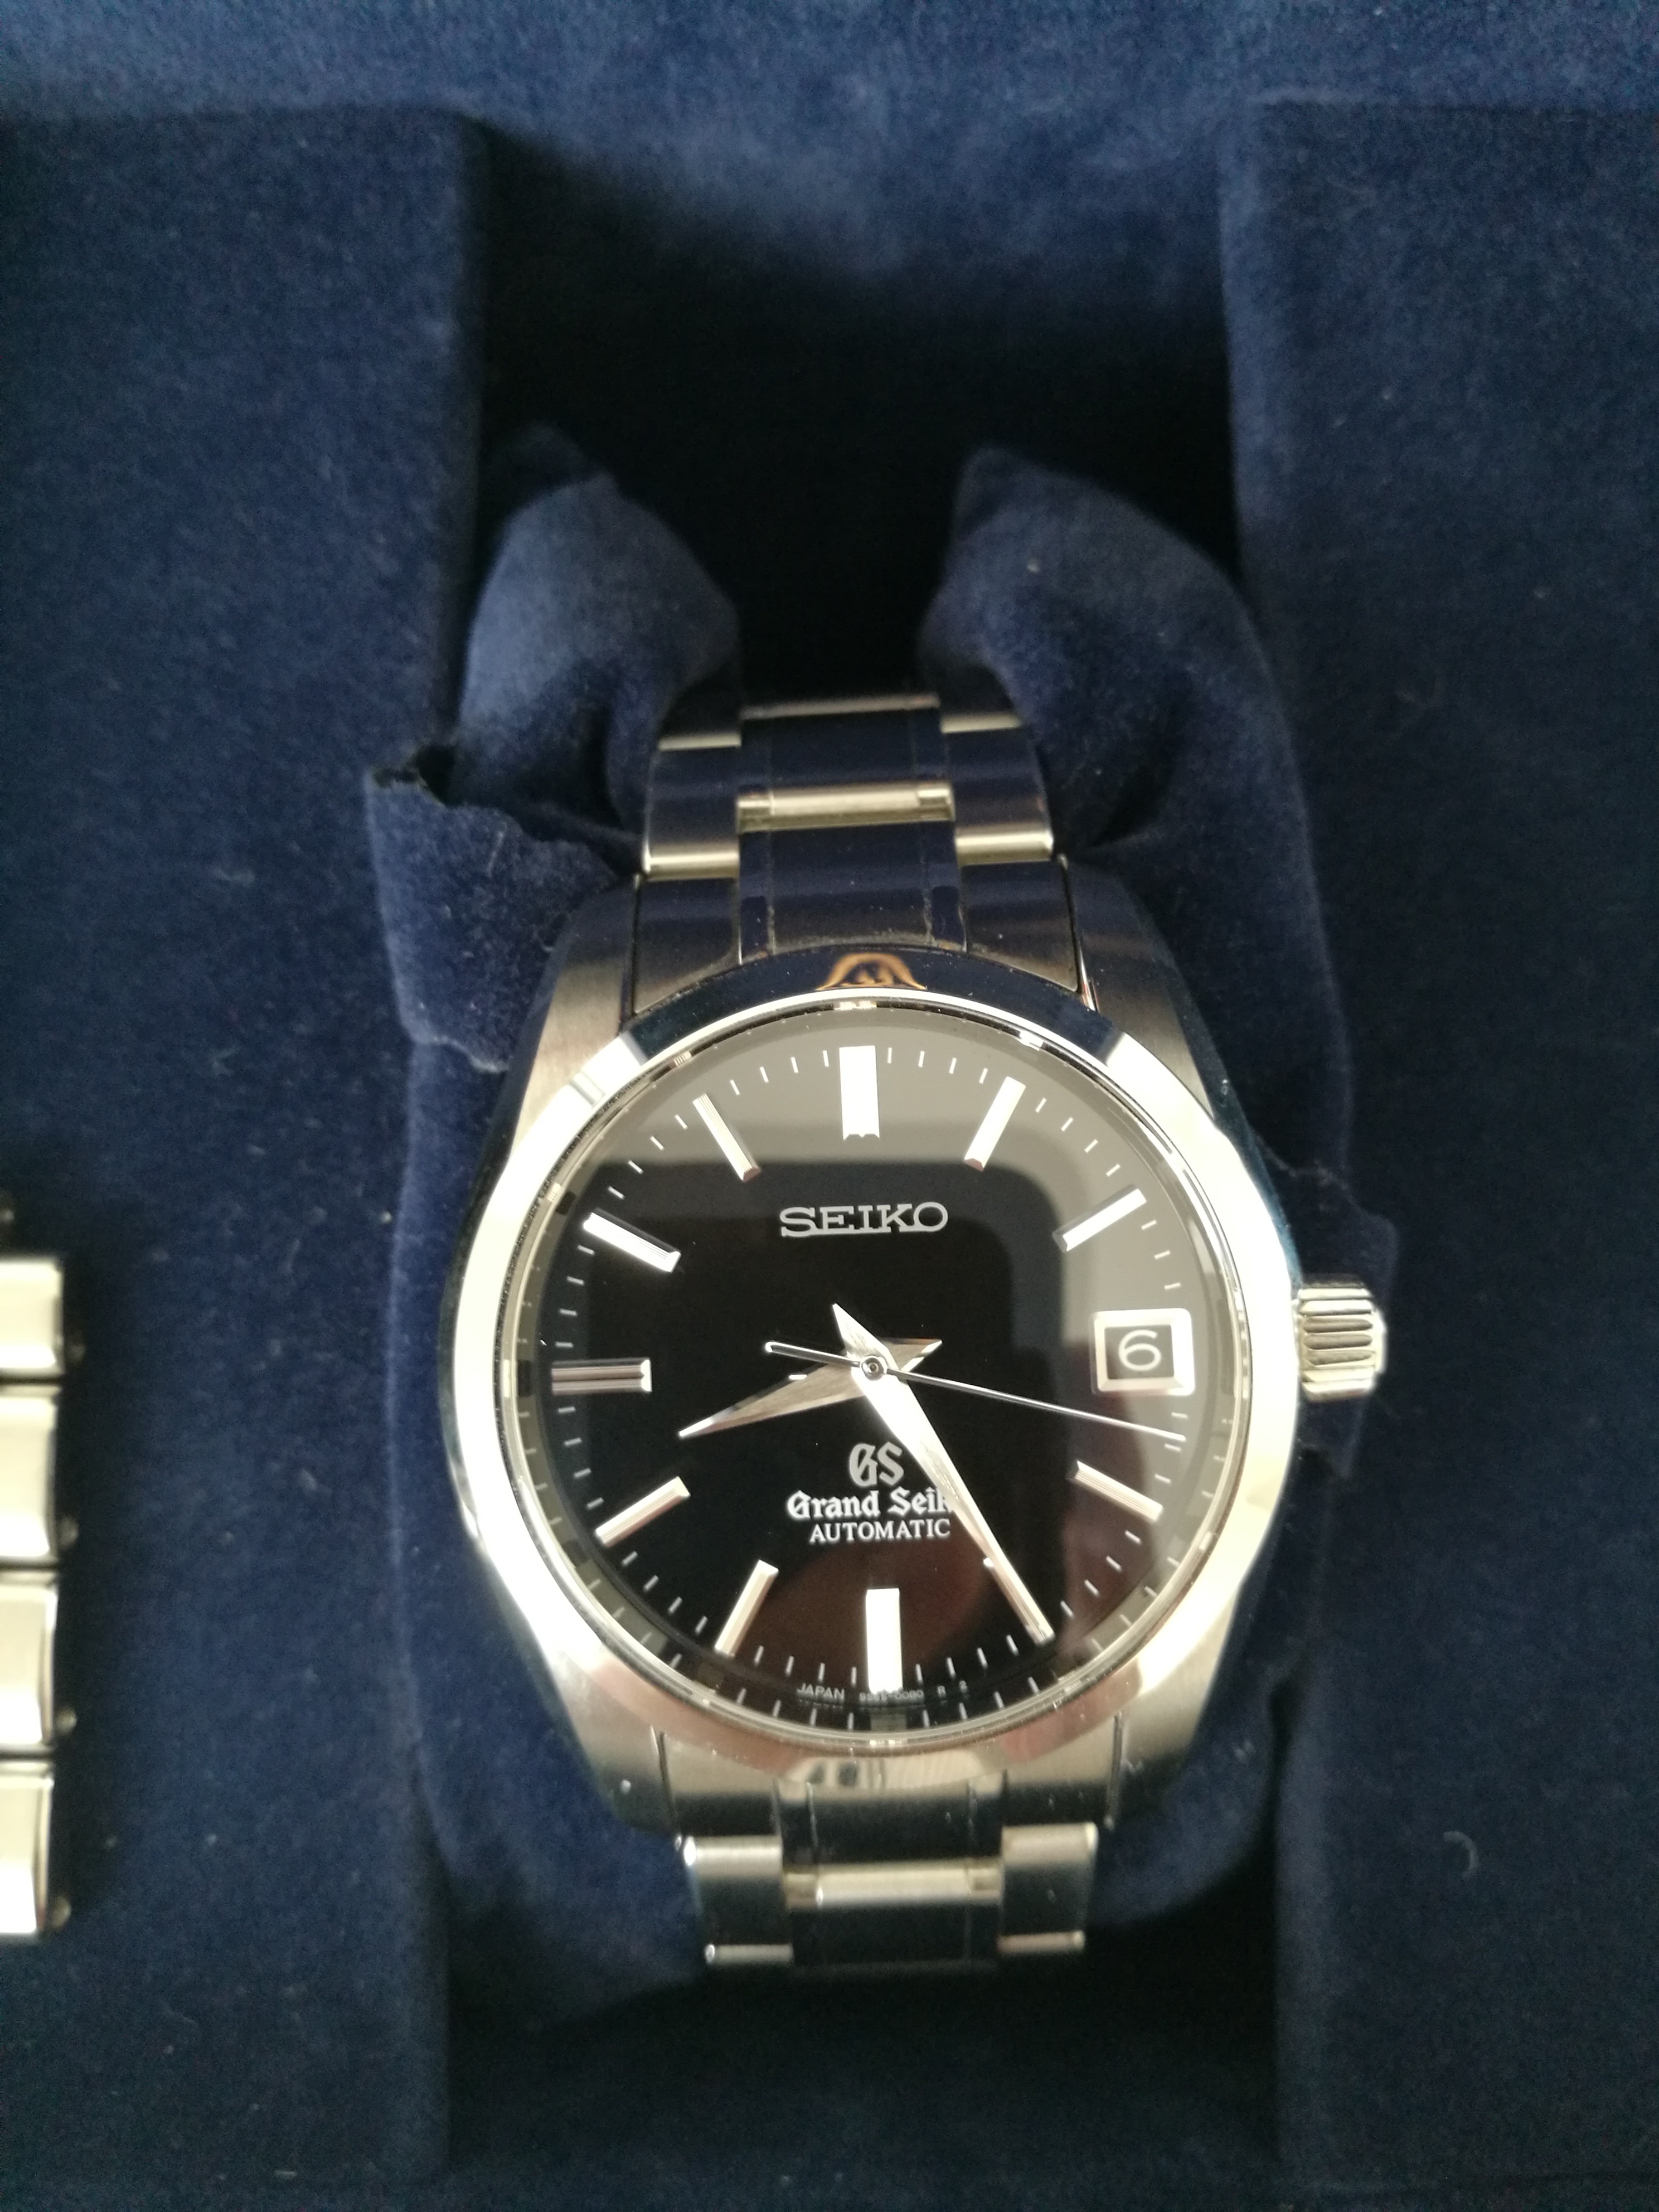 WTS] Grand Seiko SBGR053 Full Kit Excellent Condition | WatchCharts